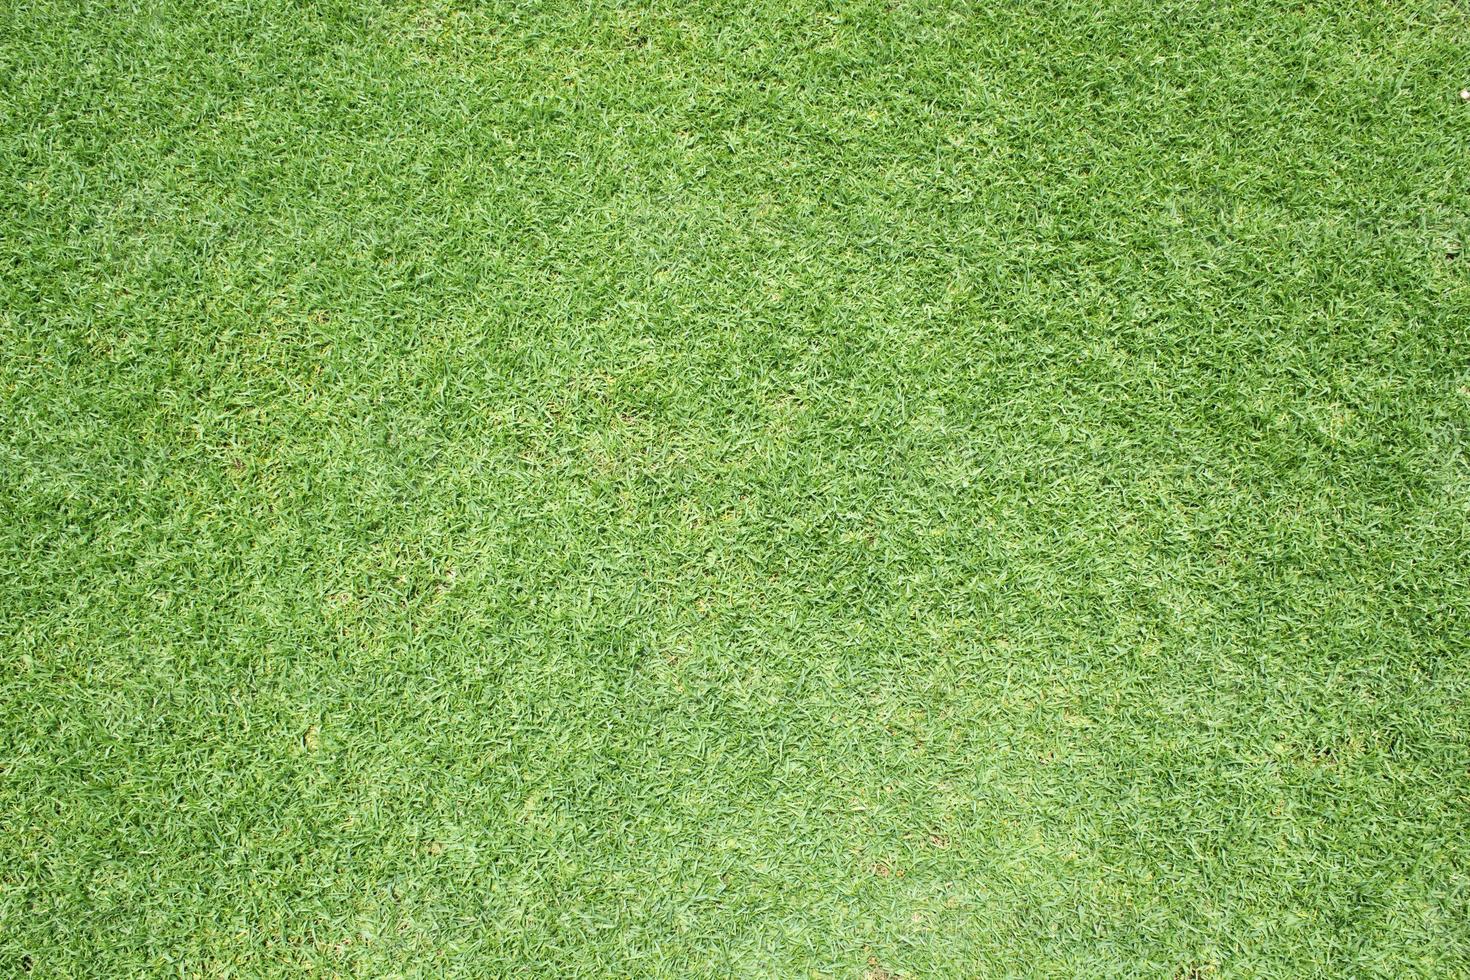 Beautiful green grass pattern from golf course photo